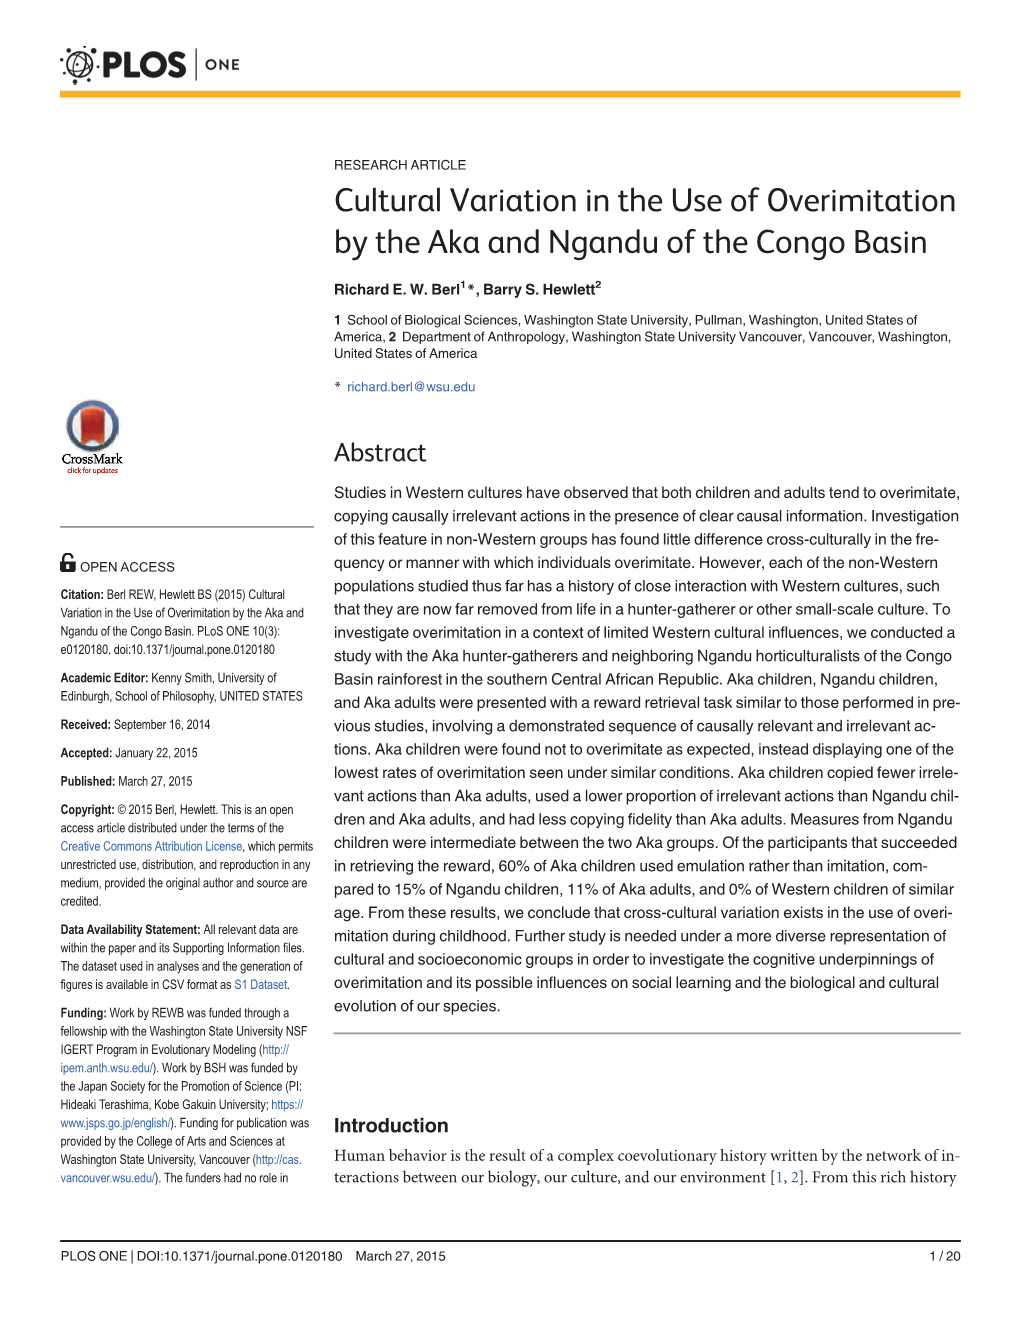 Cultural Variation in the Use of Overimitation by the Aka and Ngandu of the Congo Basin